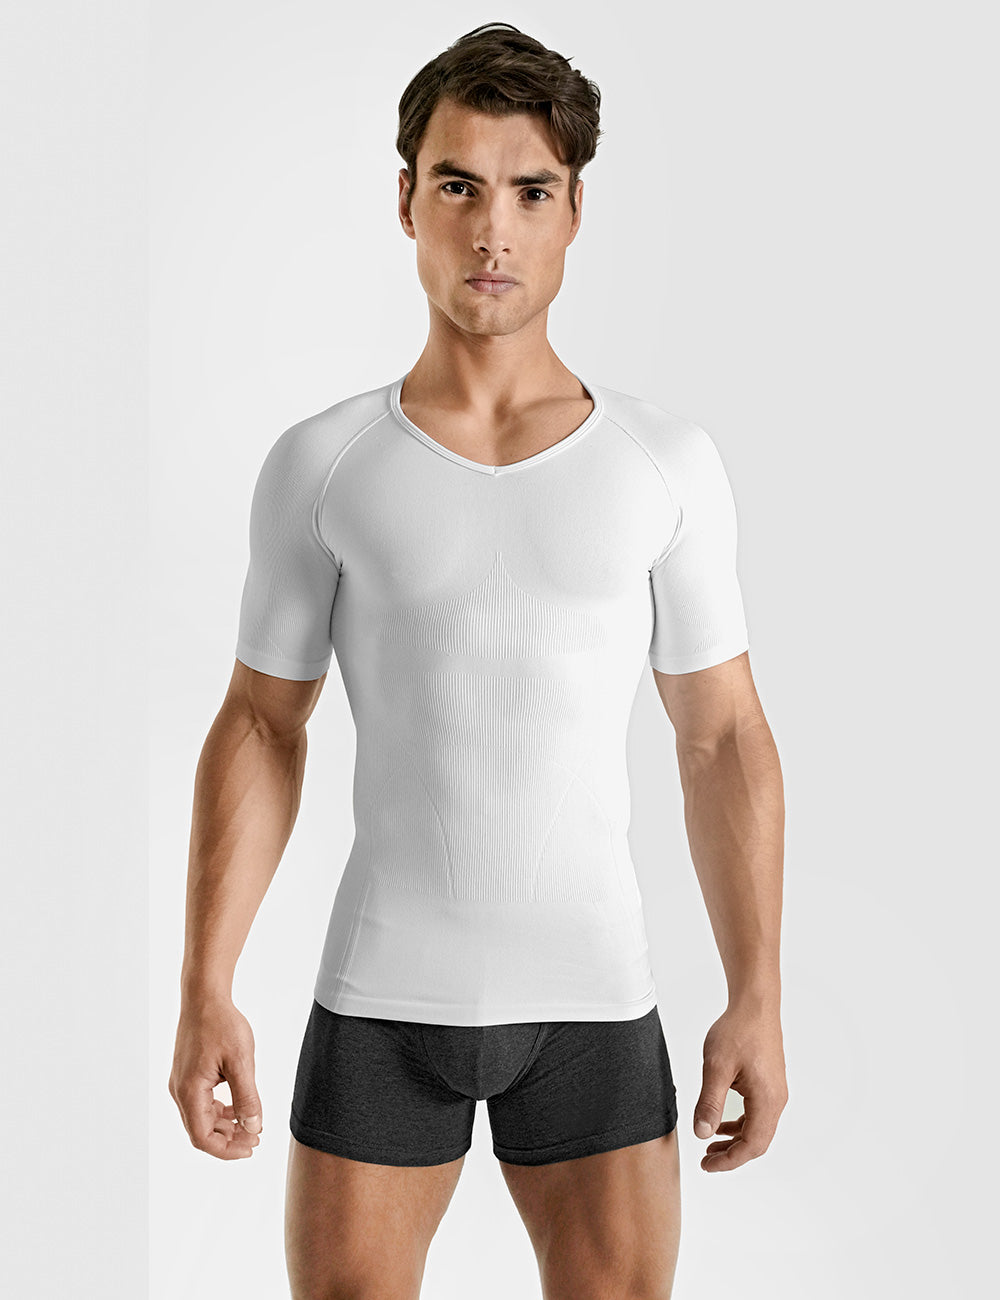 Men's Under Armour Compression Shirts Work From Home at International Jock